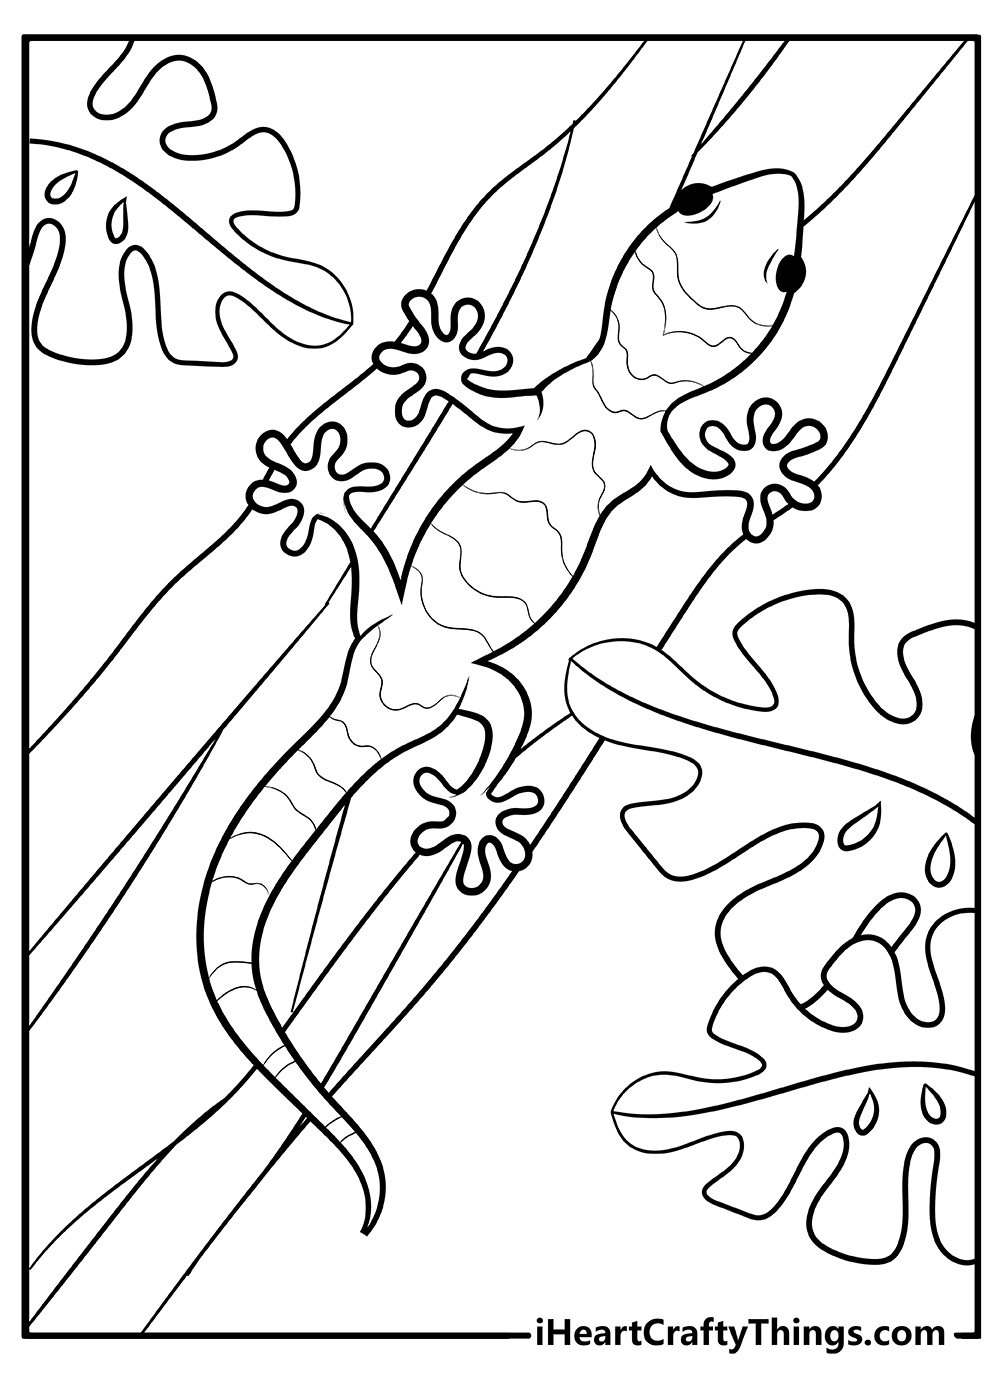 baby Lizard Coloring Pages free download